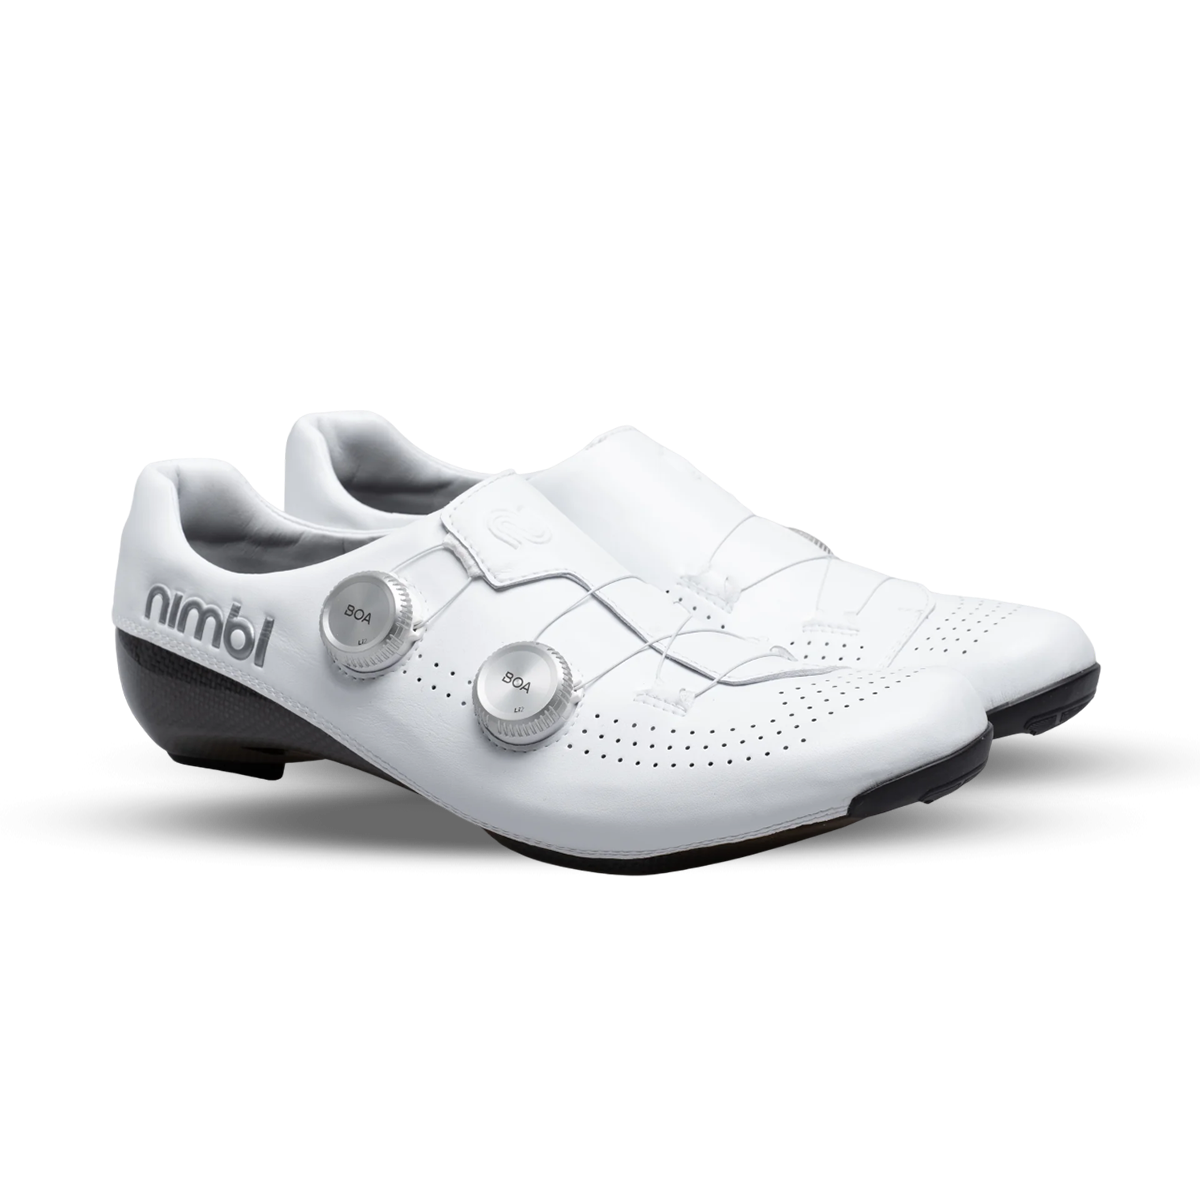 Exceed Ultimate Glide Road Bike Shoe - White / Silver